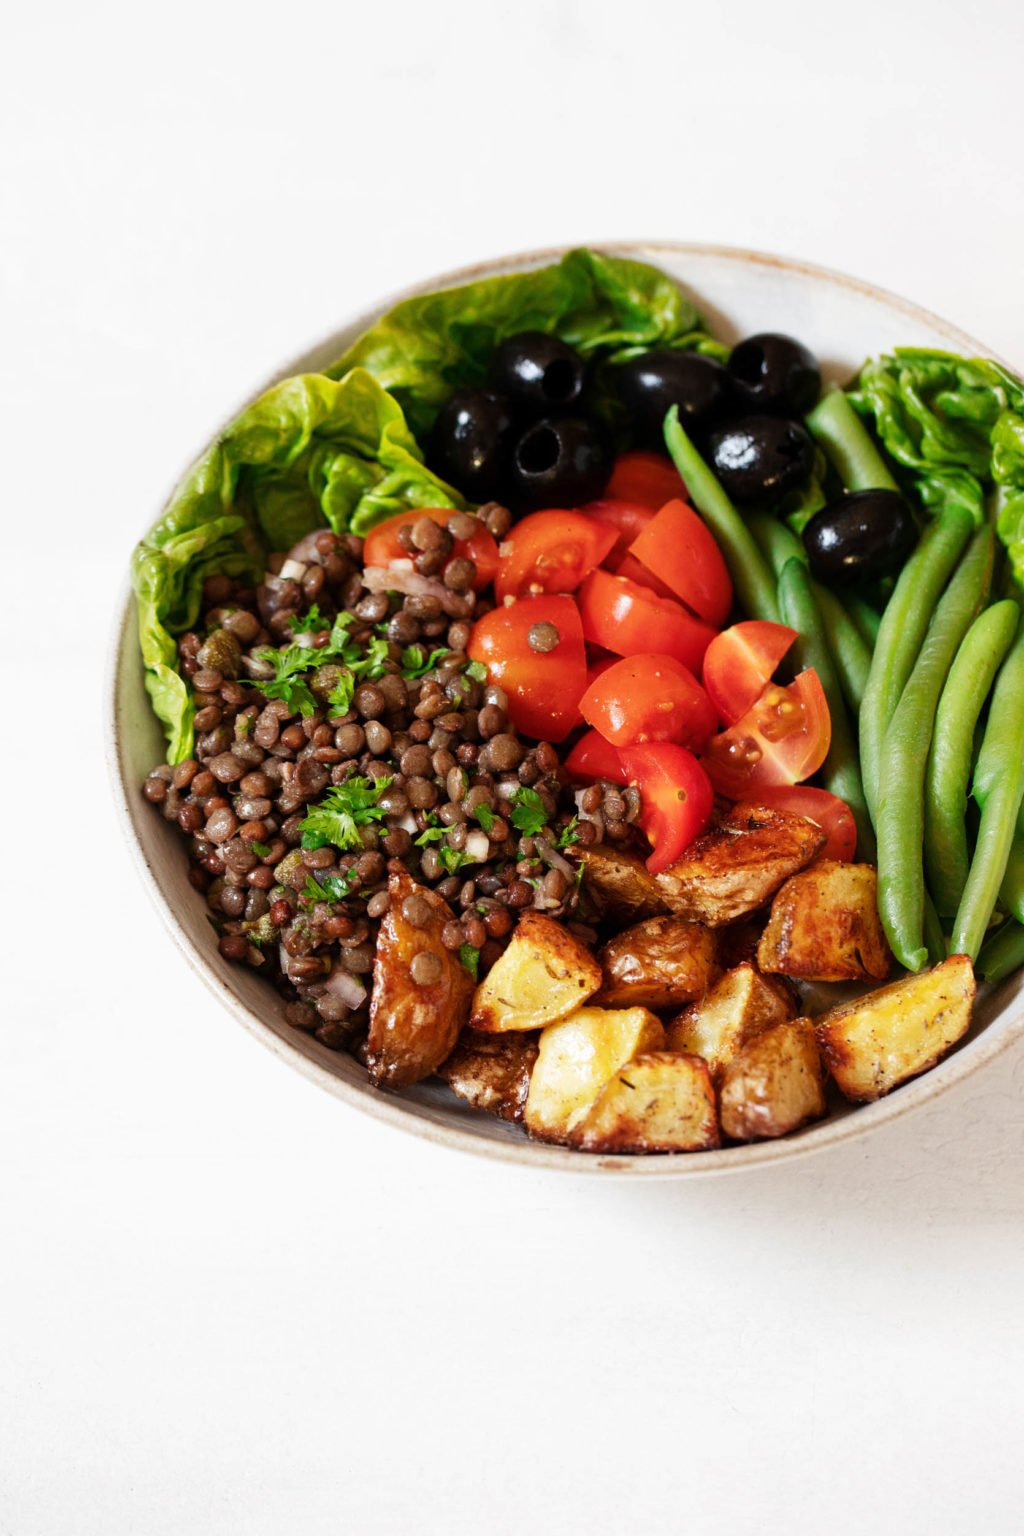 A white bowl has been piled with cooked French lentils, roasted potatoes, tomatoes, olives, and green beans.